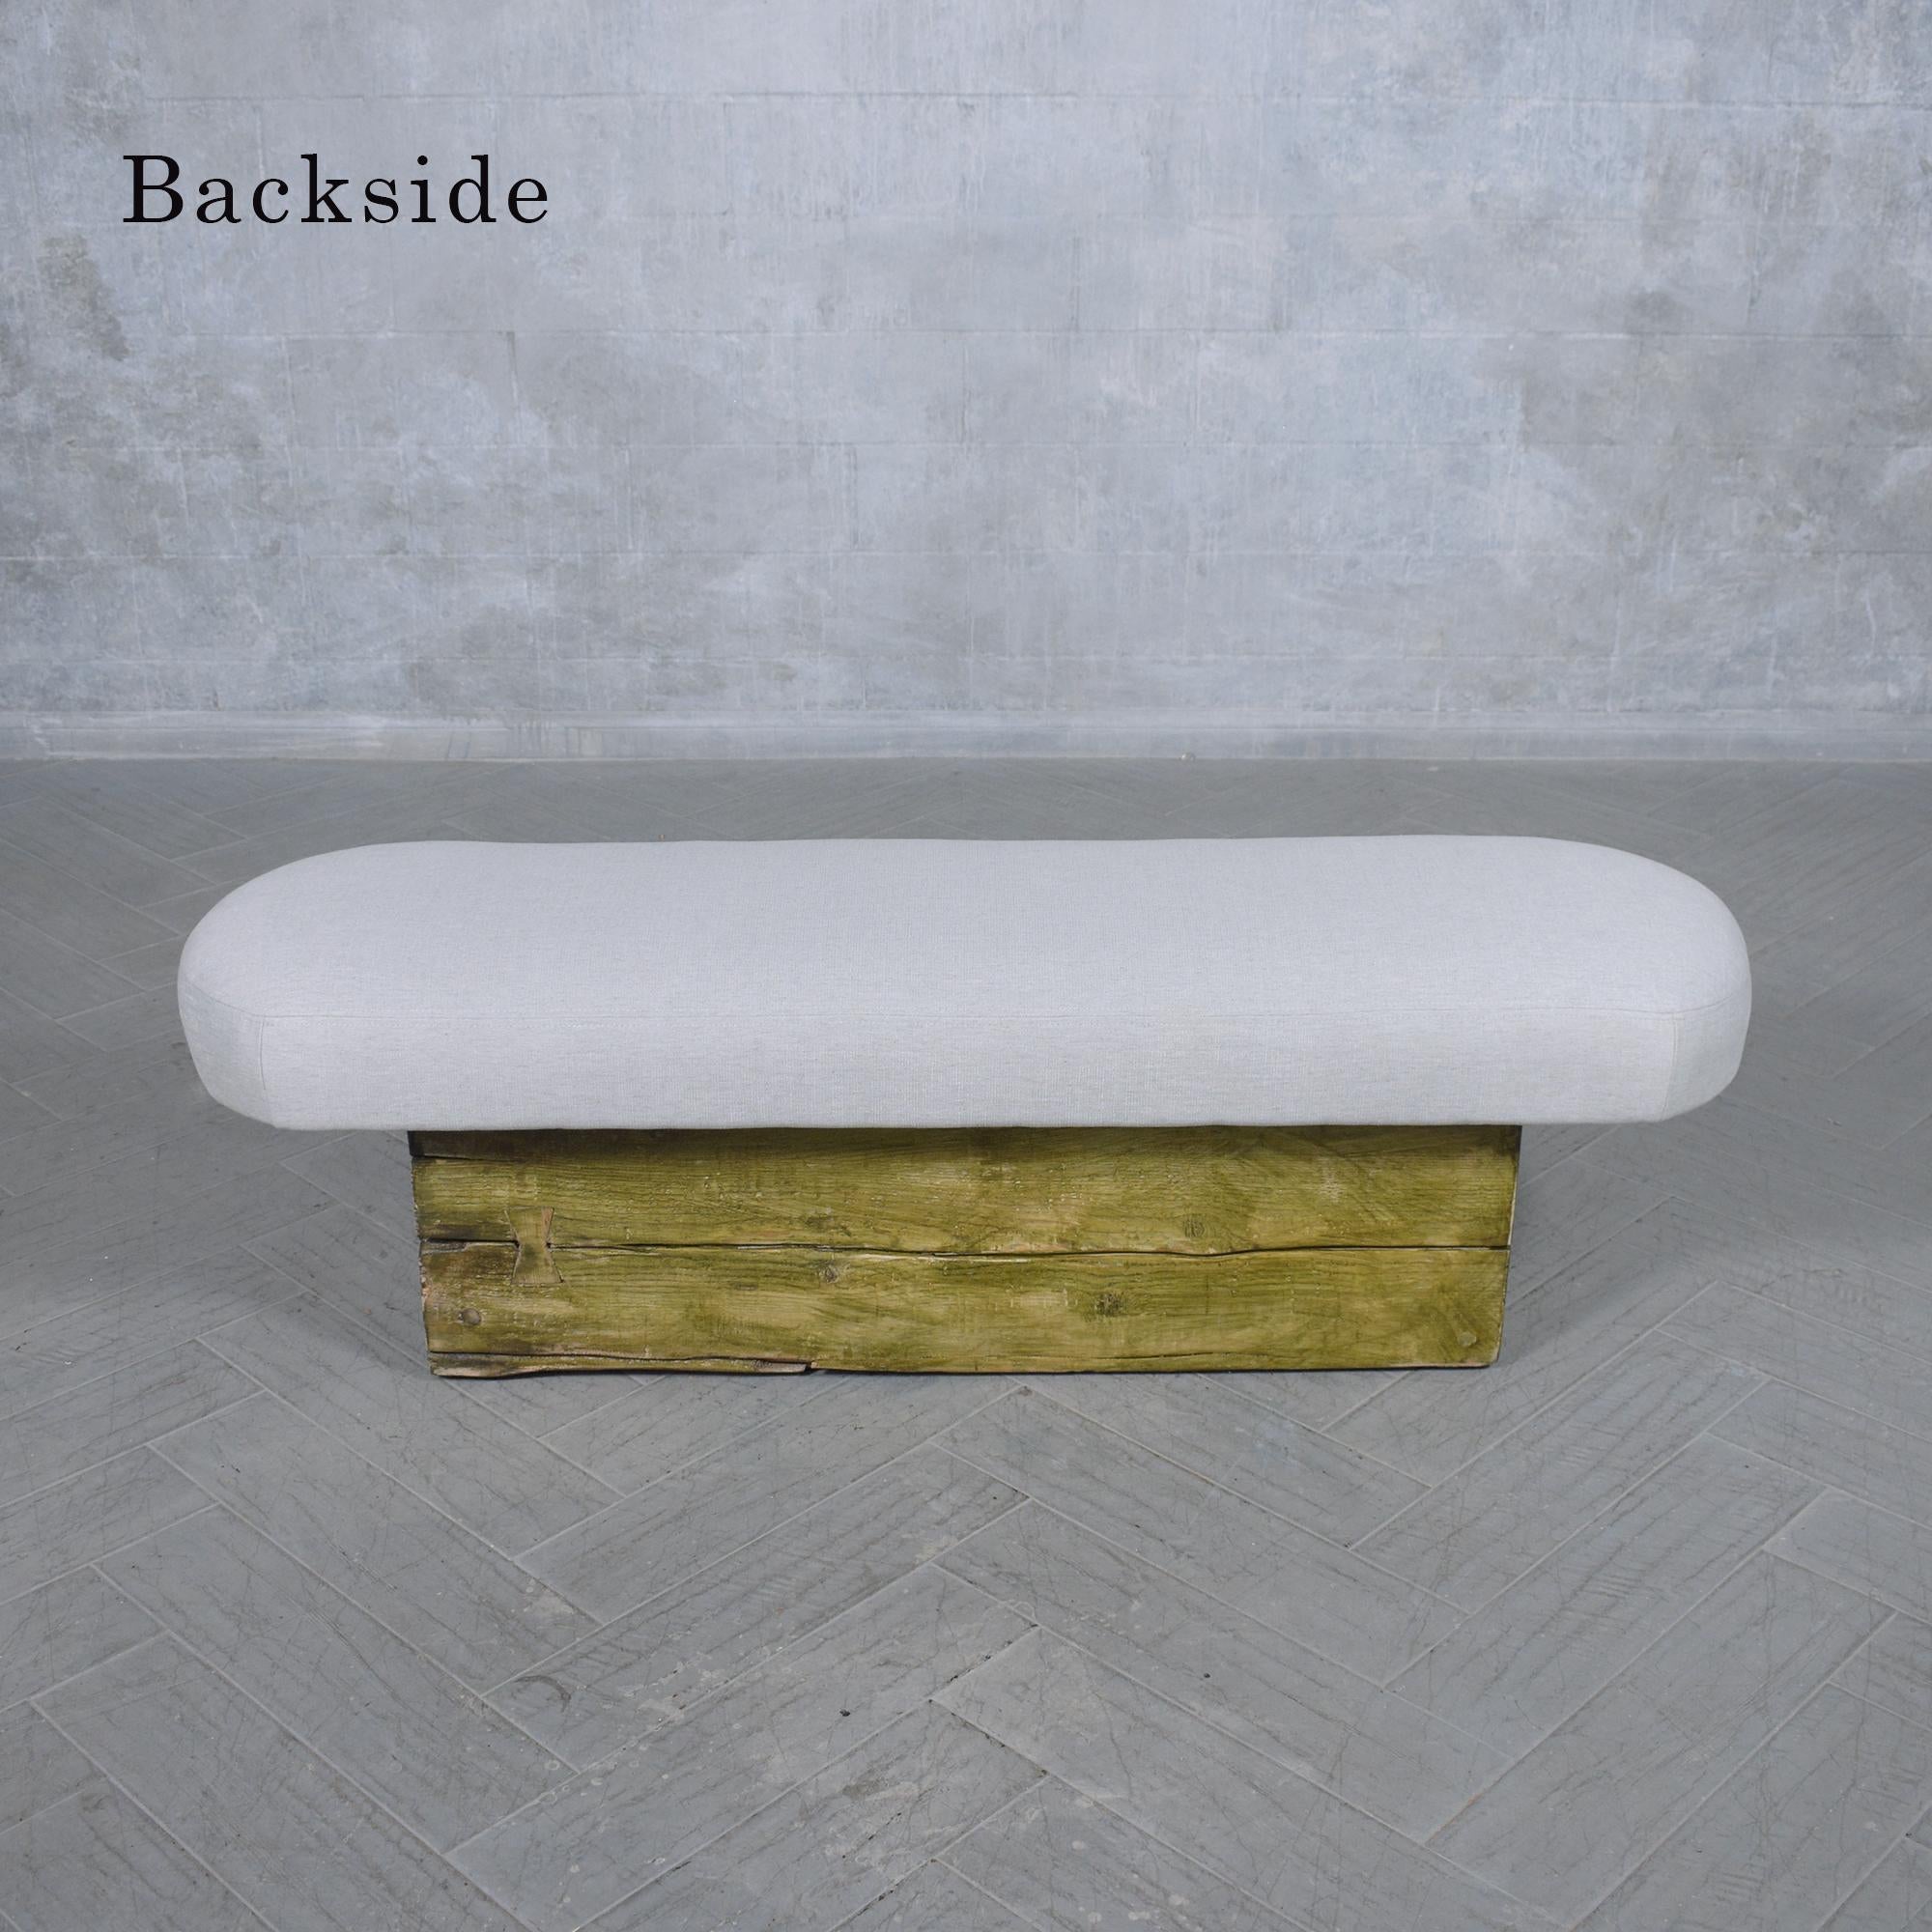 Painted Restored Mid Century Modern Slab Bench with Whitewashed Finish and Linen Cushion For Sale